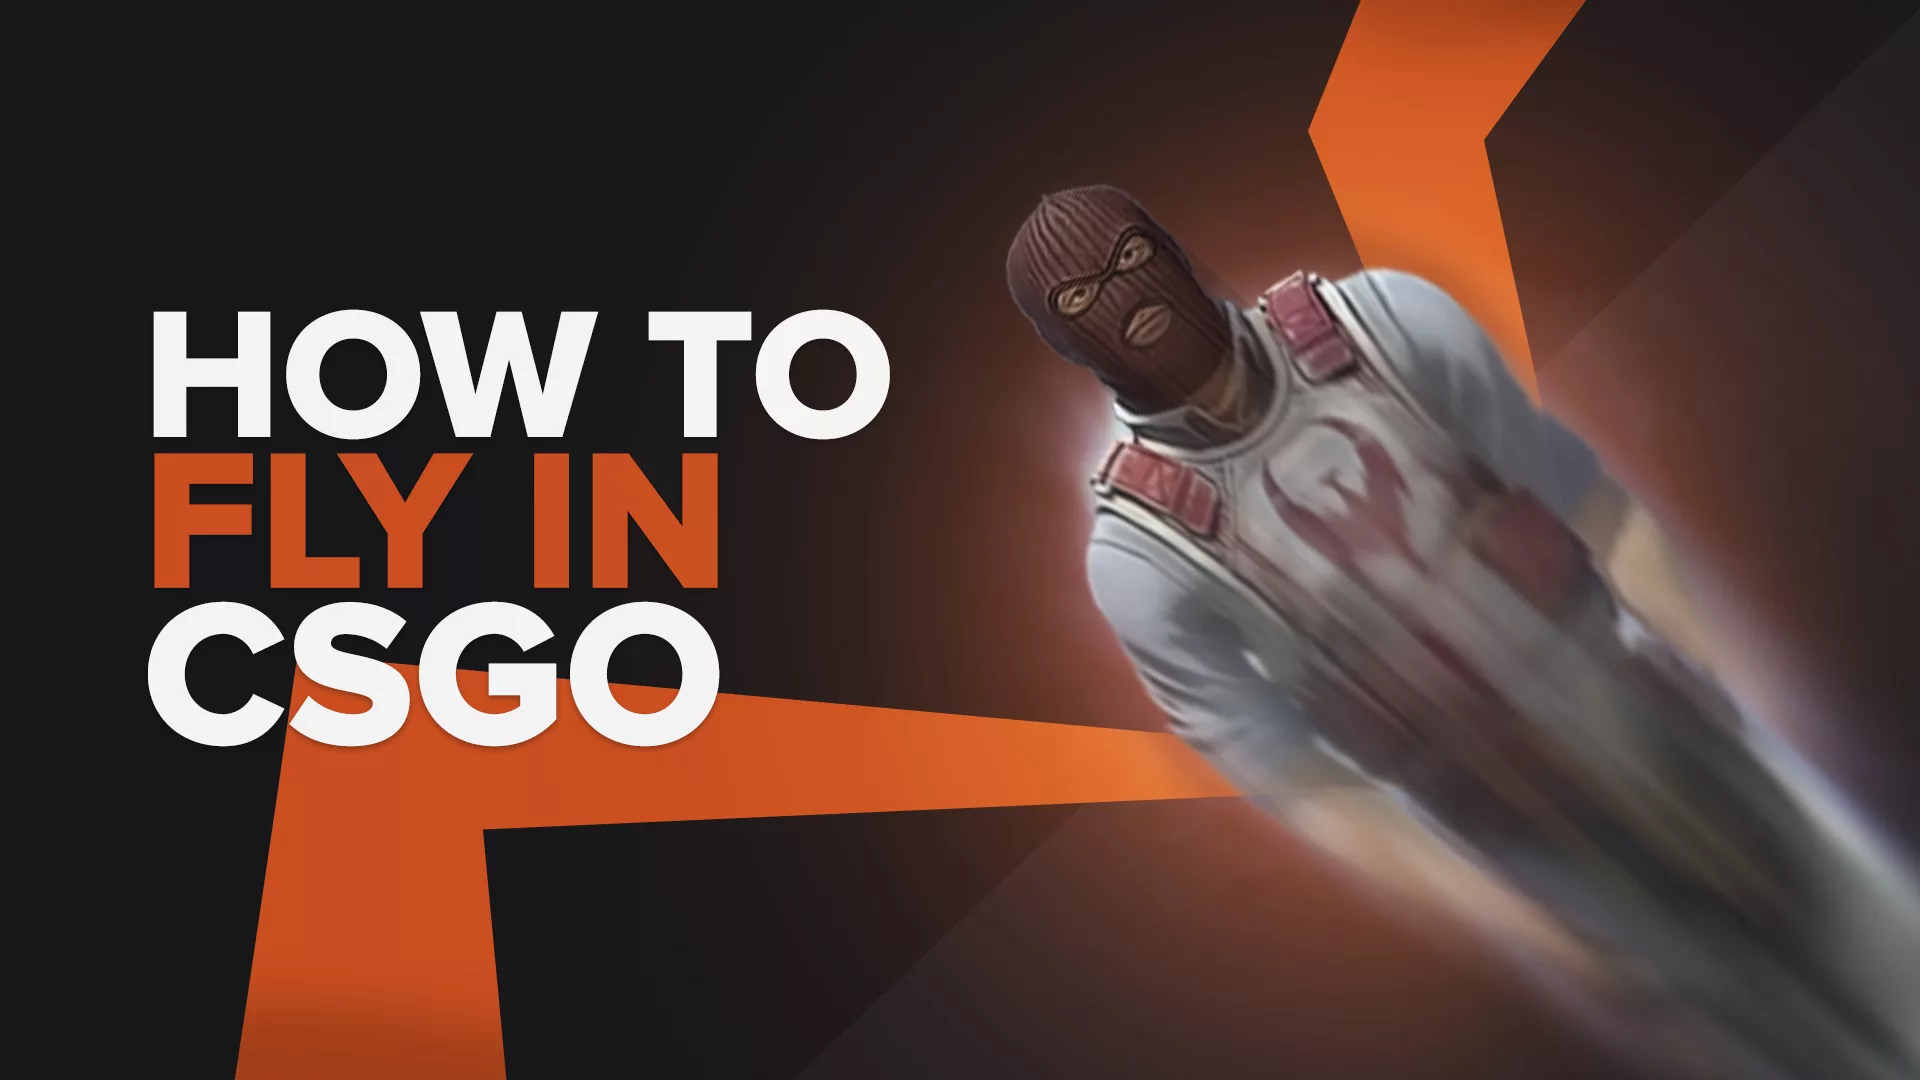 How to Fly in CS:GO